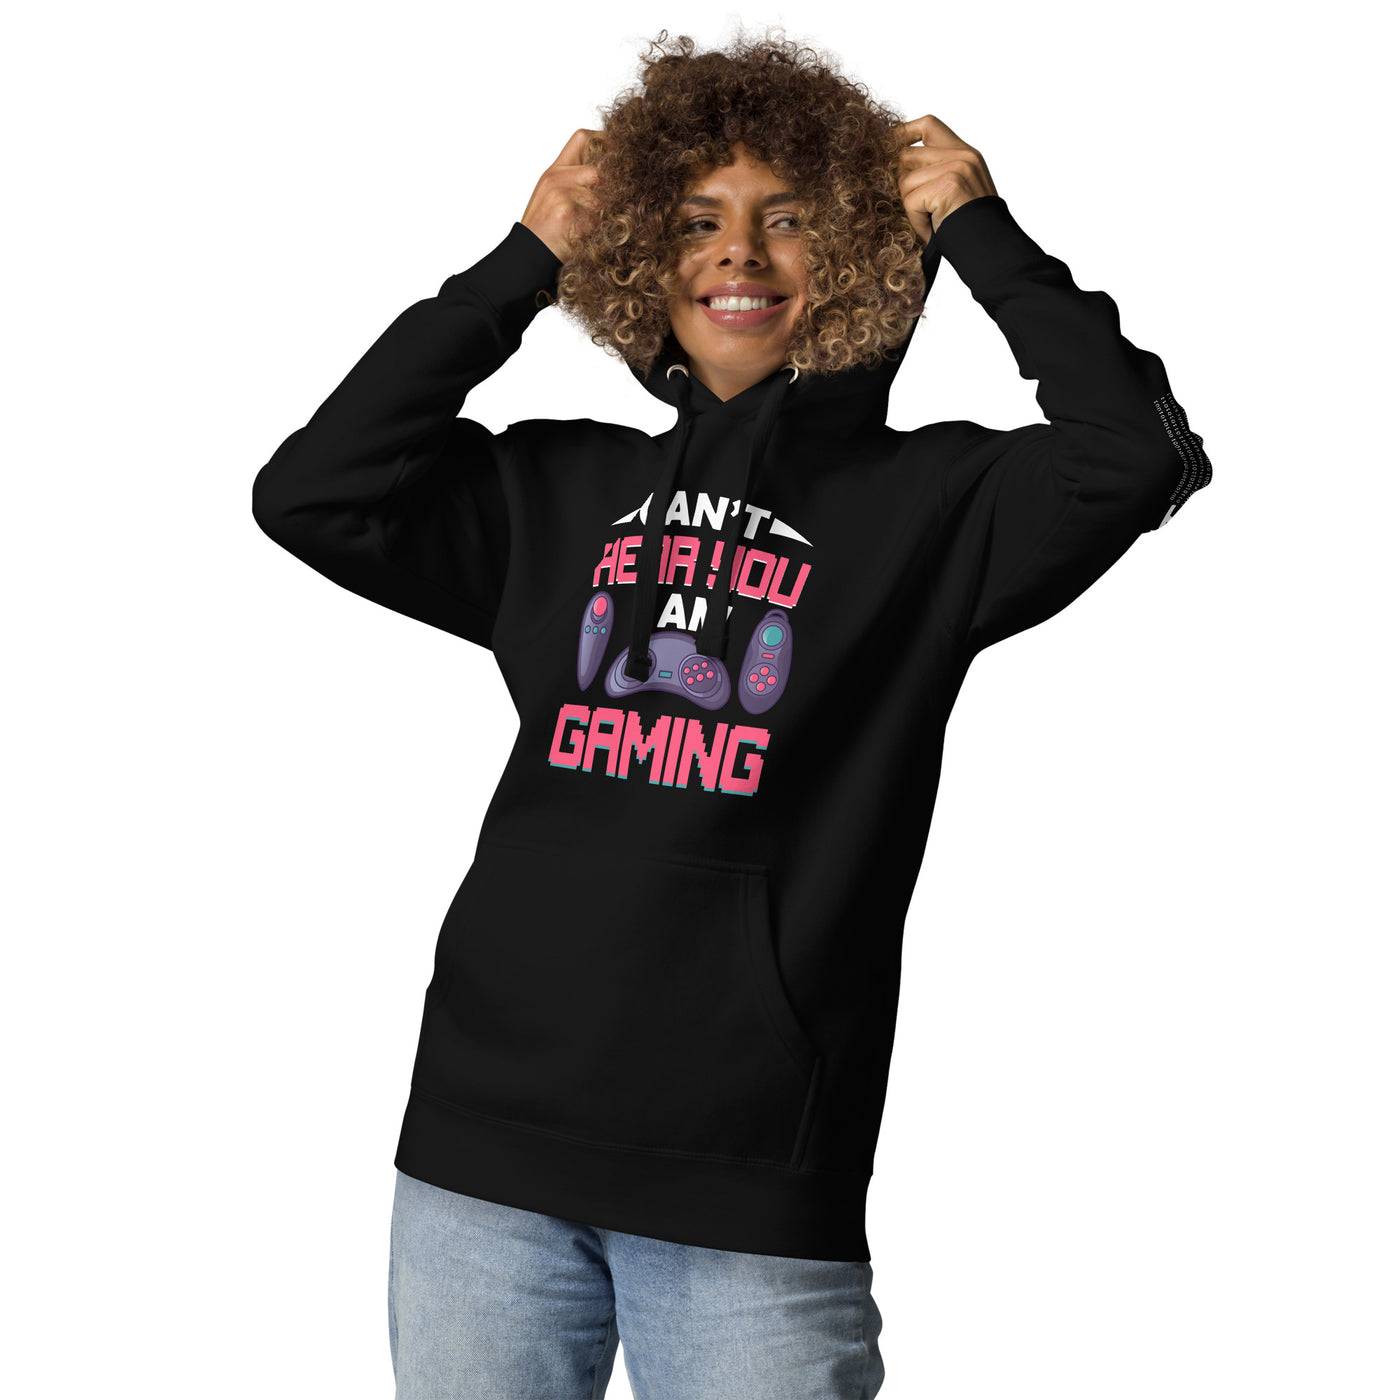 Can't Hear you, I am Gaming - Unisex Hoodie